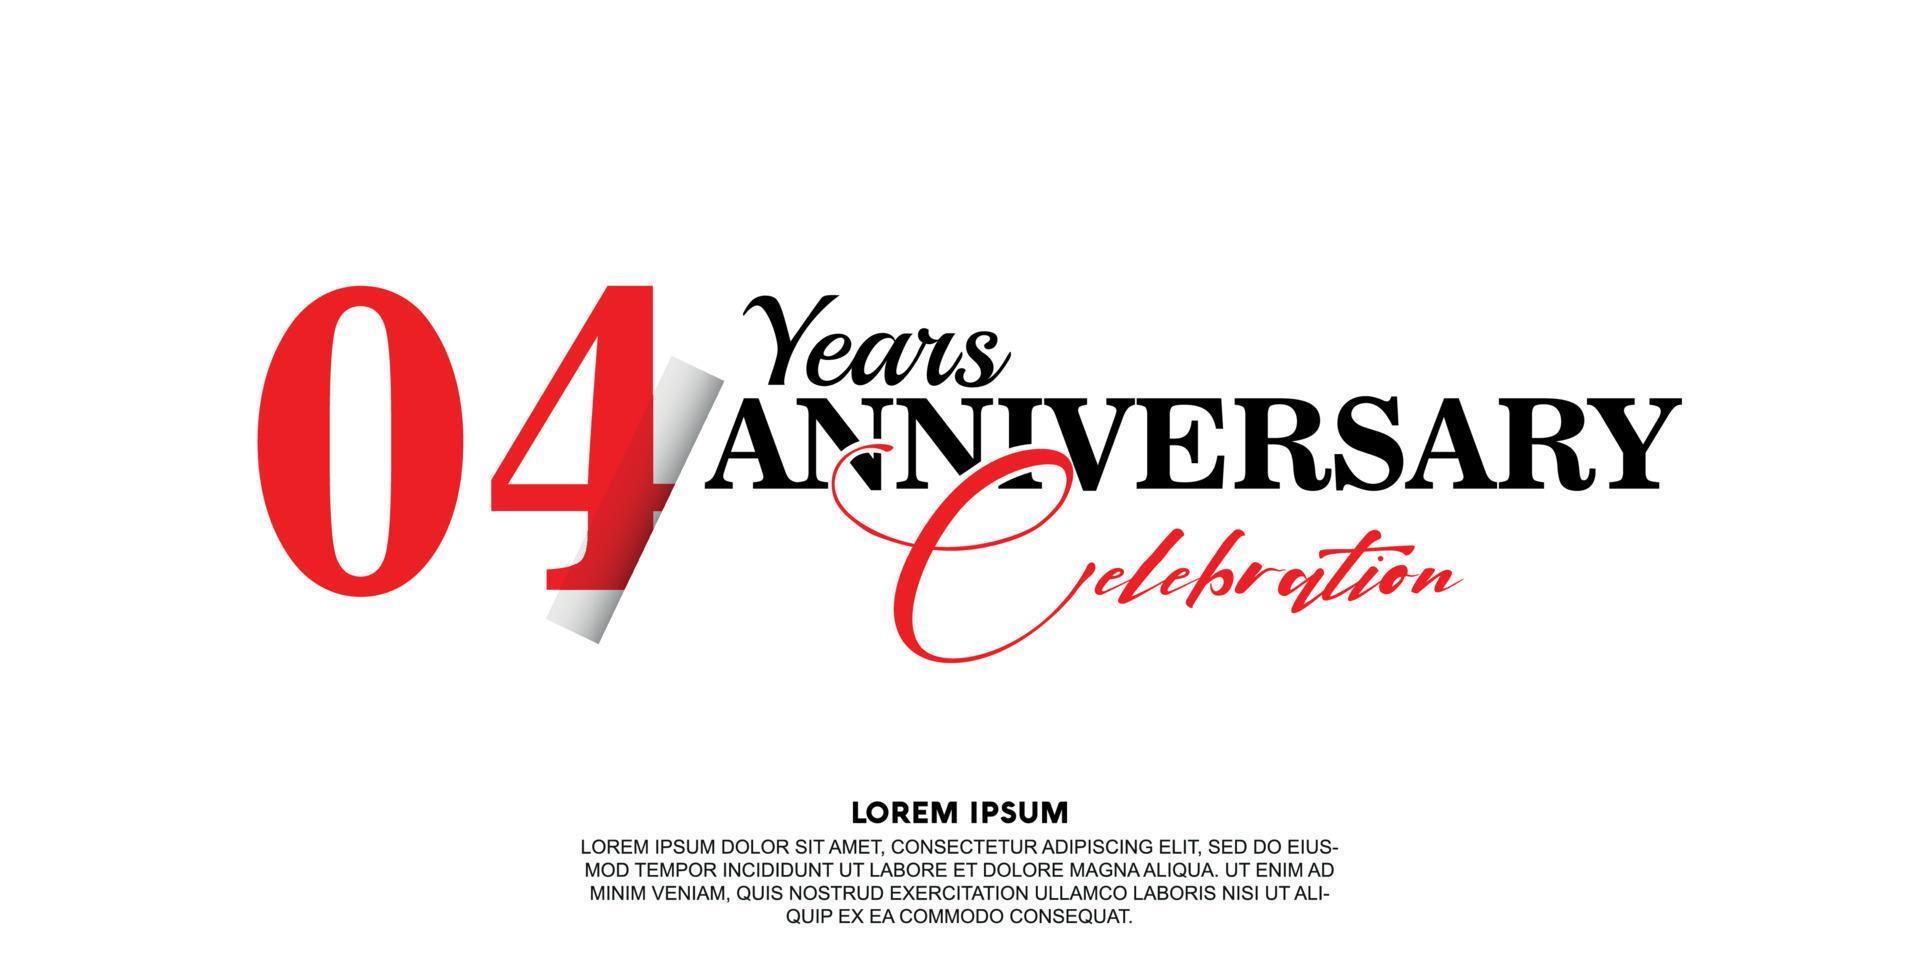 04 year anniversary celebration logo vector design with red and black color on white background abstract